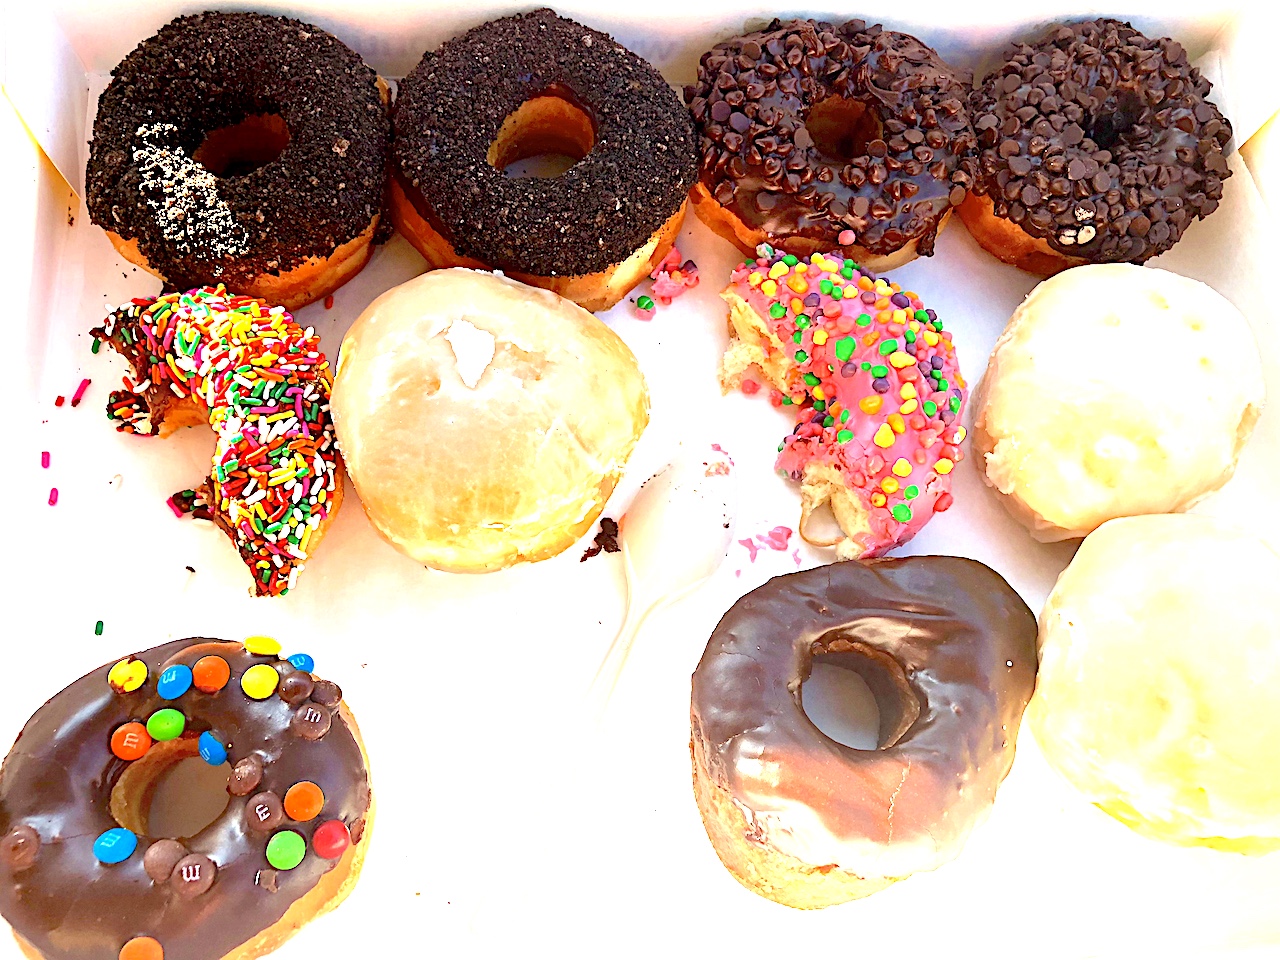 Donut King in Mineolla, FL. 2-day itinerary for families in Gainesville, FL #gainesville #florida #tourofflorida #alachuacounty #gainesvilleFL #universityofflorida #UF #gogators #Gainesvillewithkids #gainesvilleitinerary